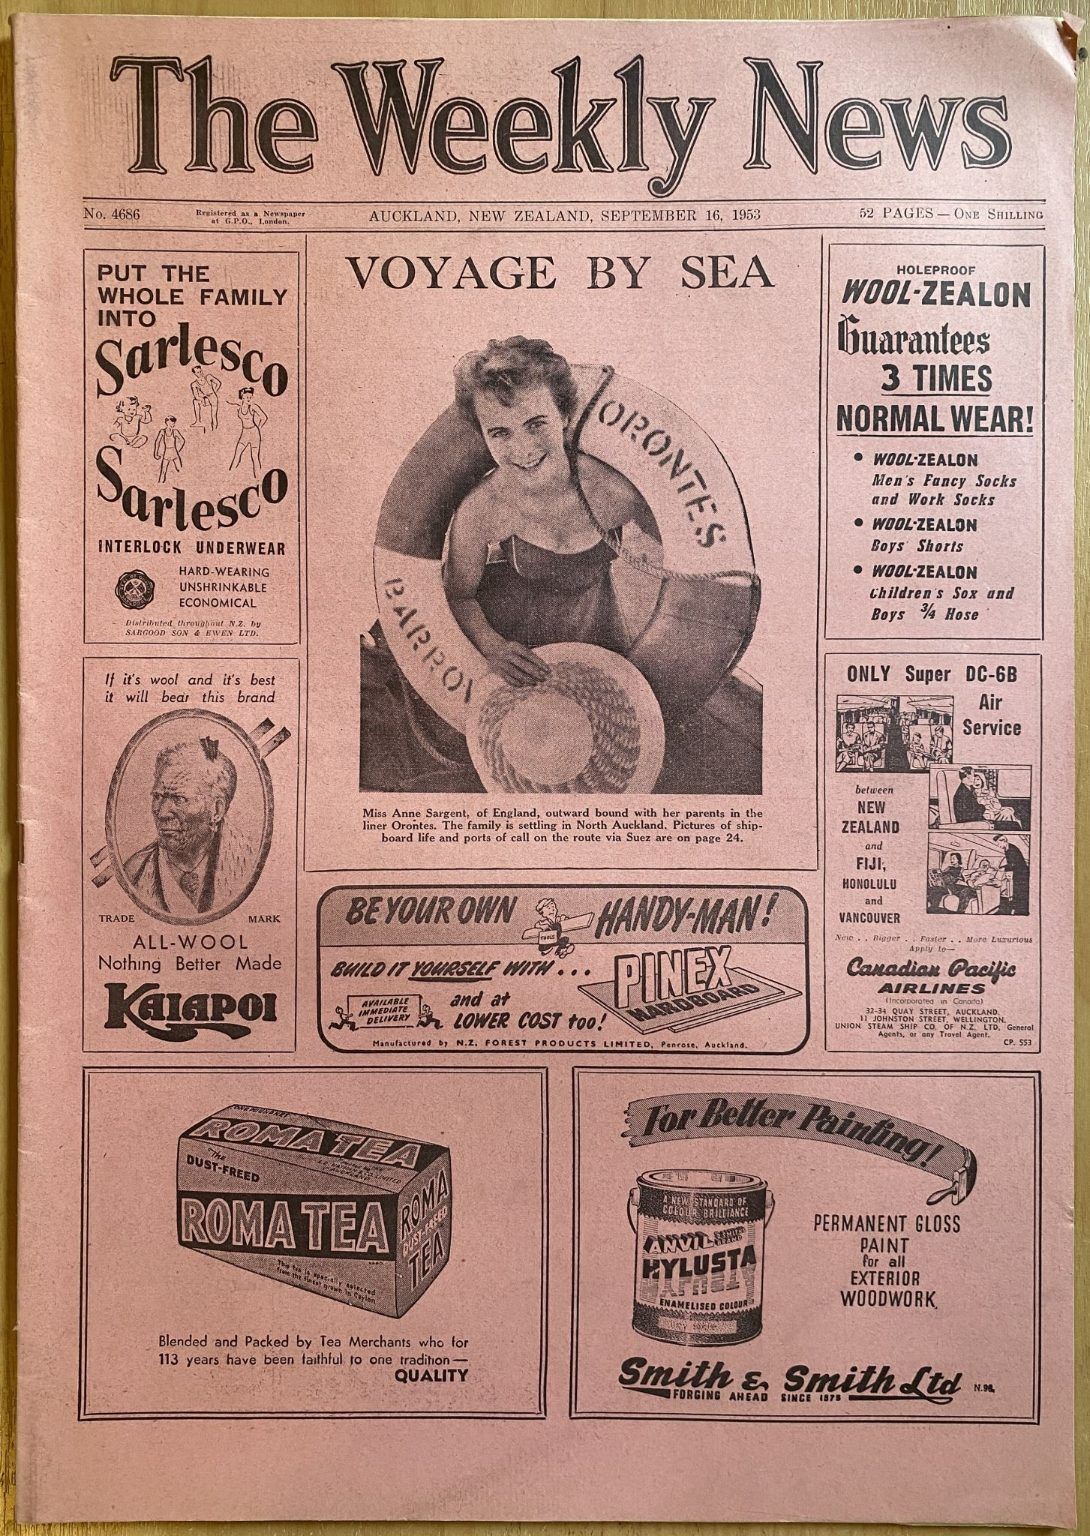 OLD NEWSPAPER: The Weekly News - No. 4686, 16 September 1953